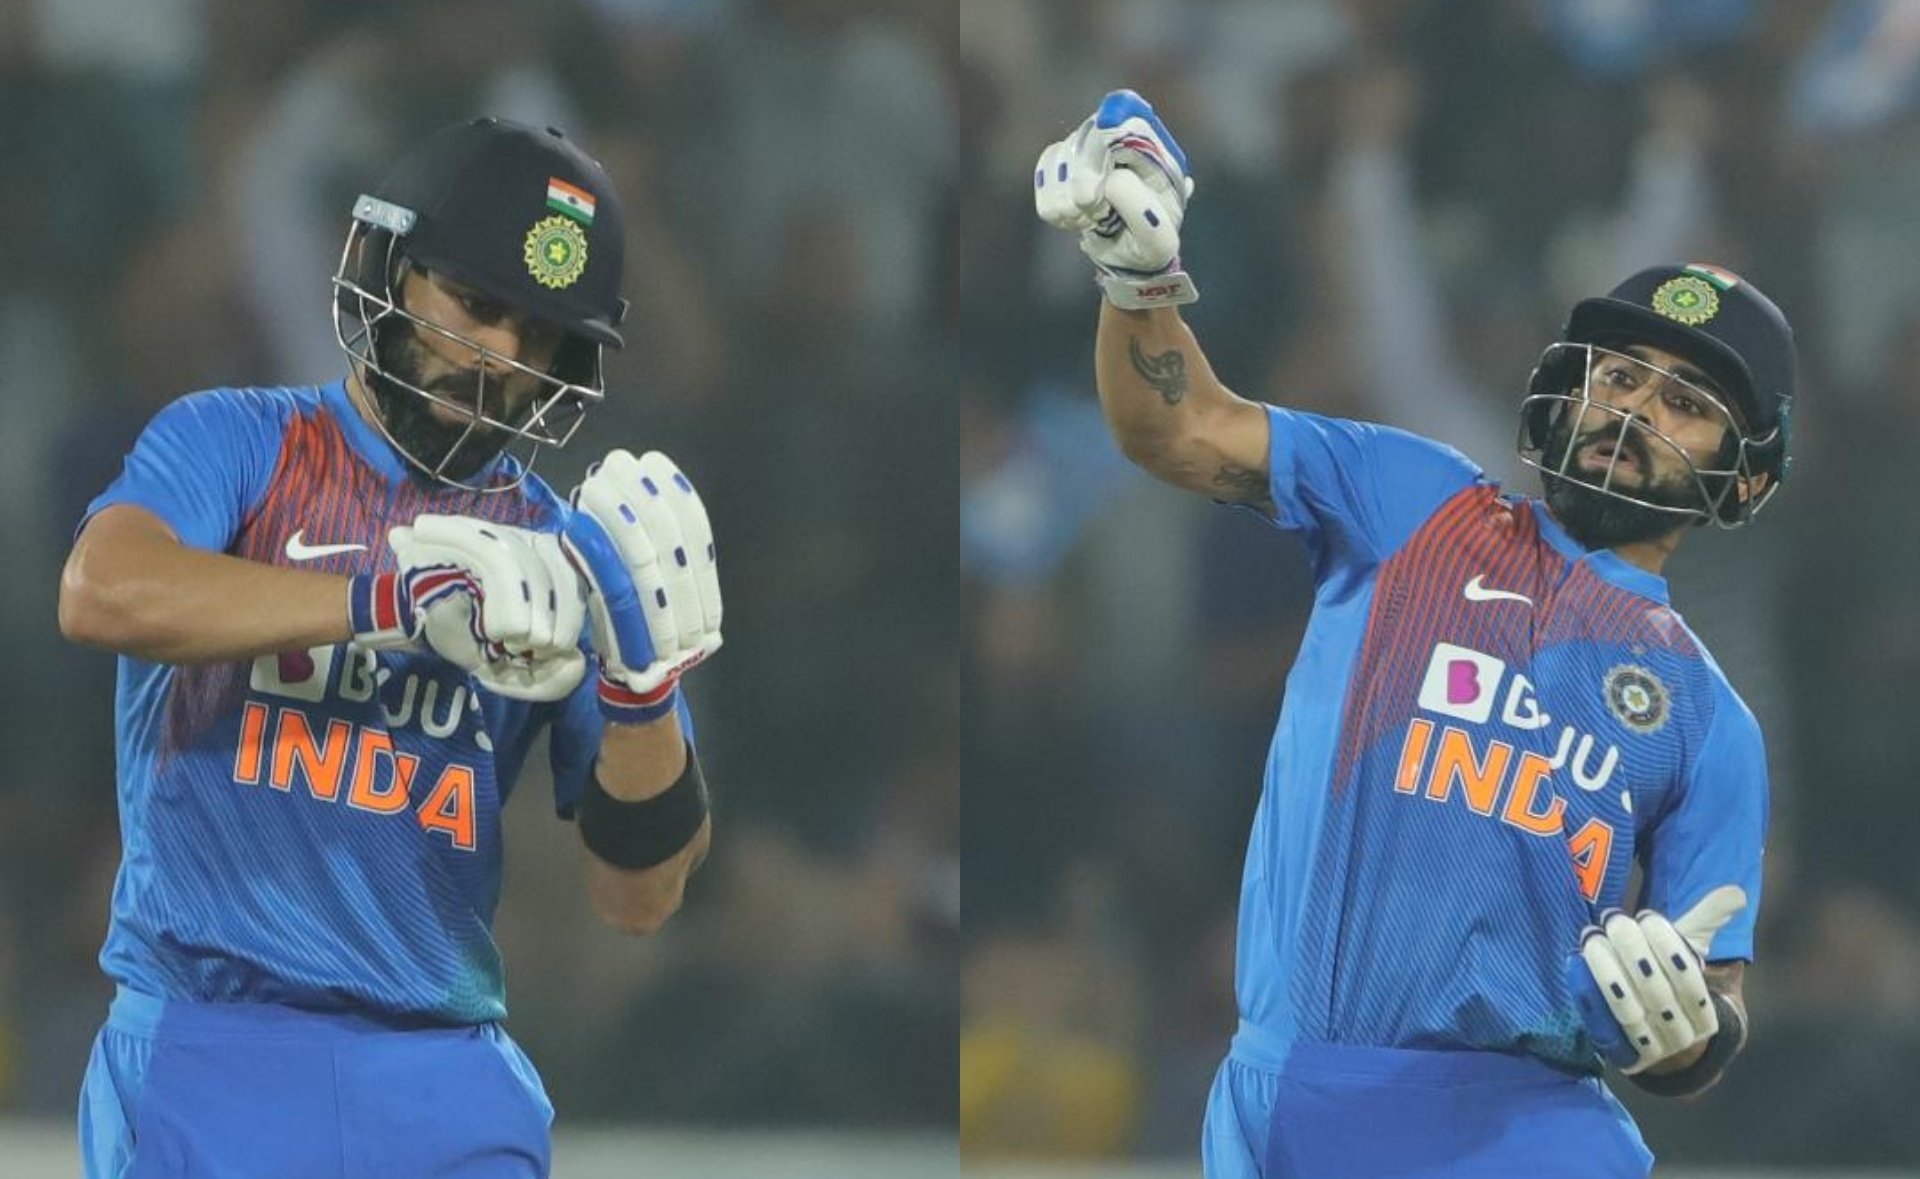 Virat Kohli gives a befitting reply to Kesrick Williams in first T20I vs West Indies at Hyderabad, virat kohli, virat kohli images, virat kohli hd images,